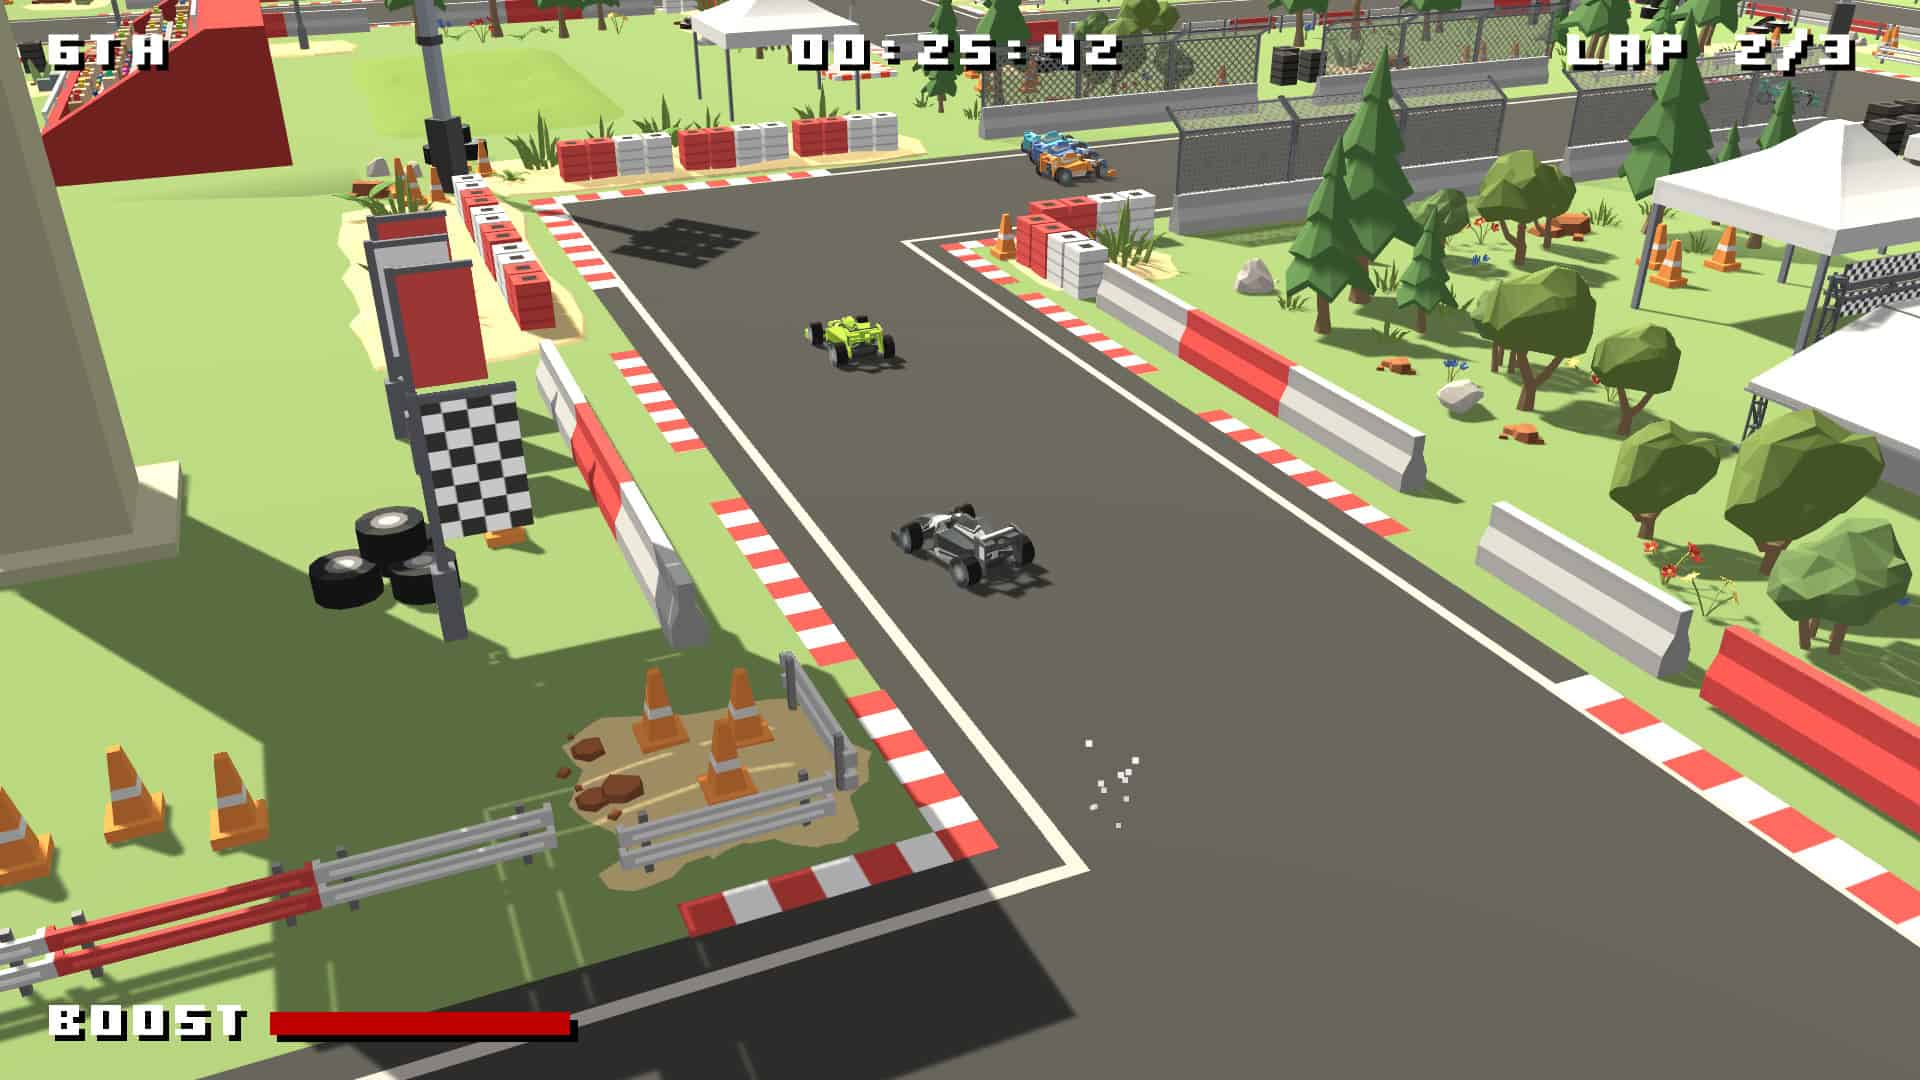 Low-poly arcade racer Formula Bit Racing DX coming to consoles this month